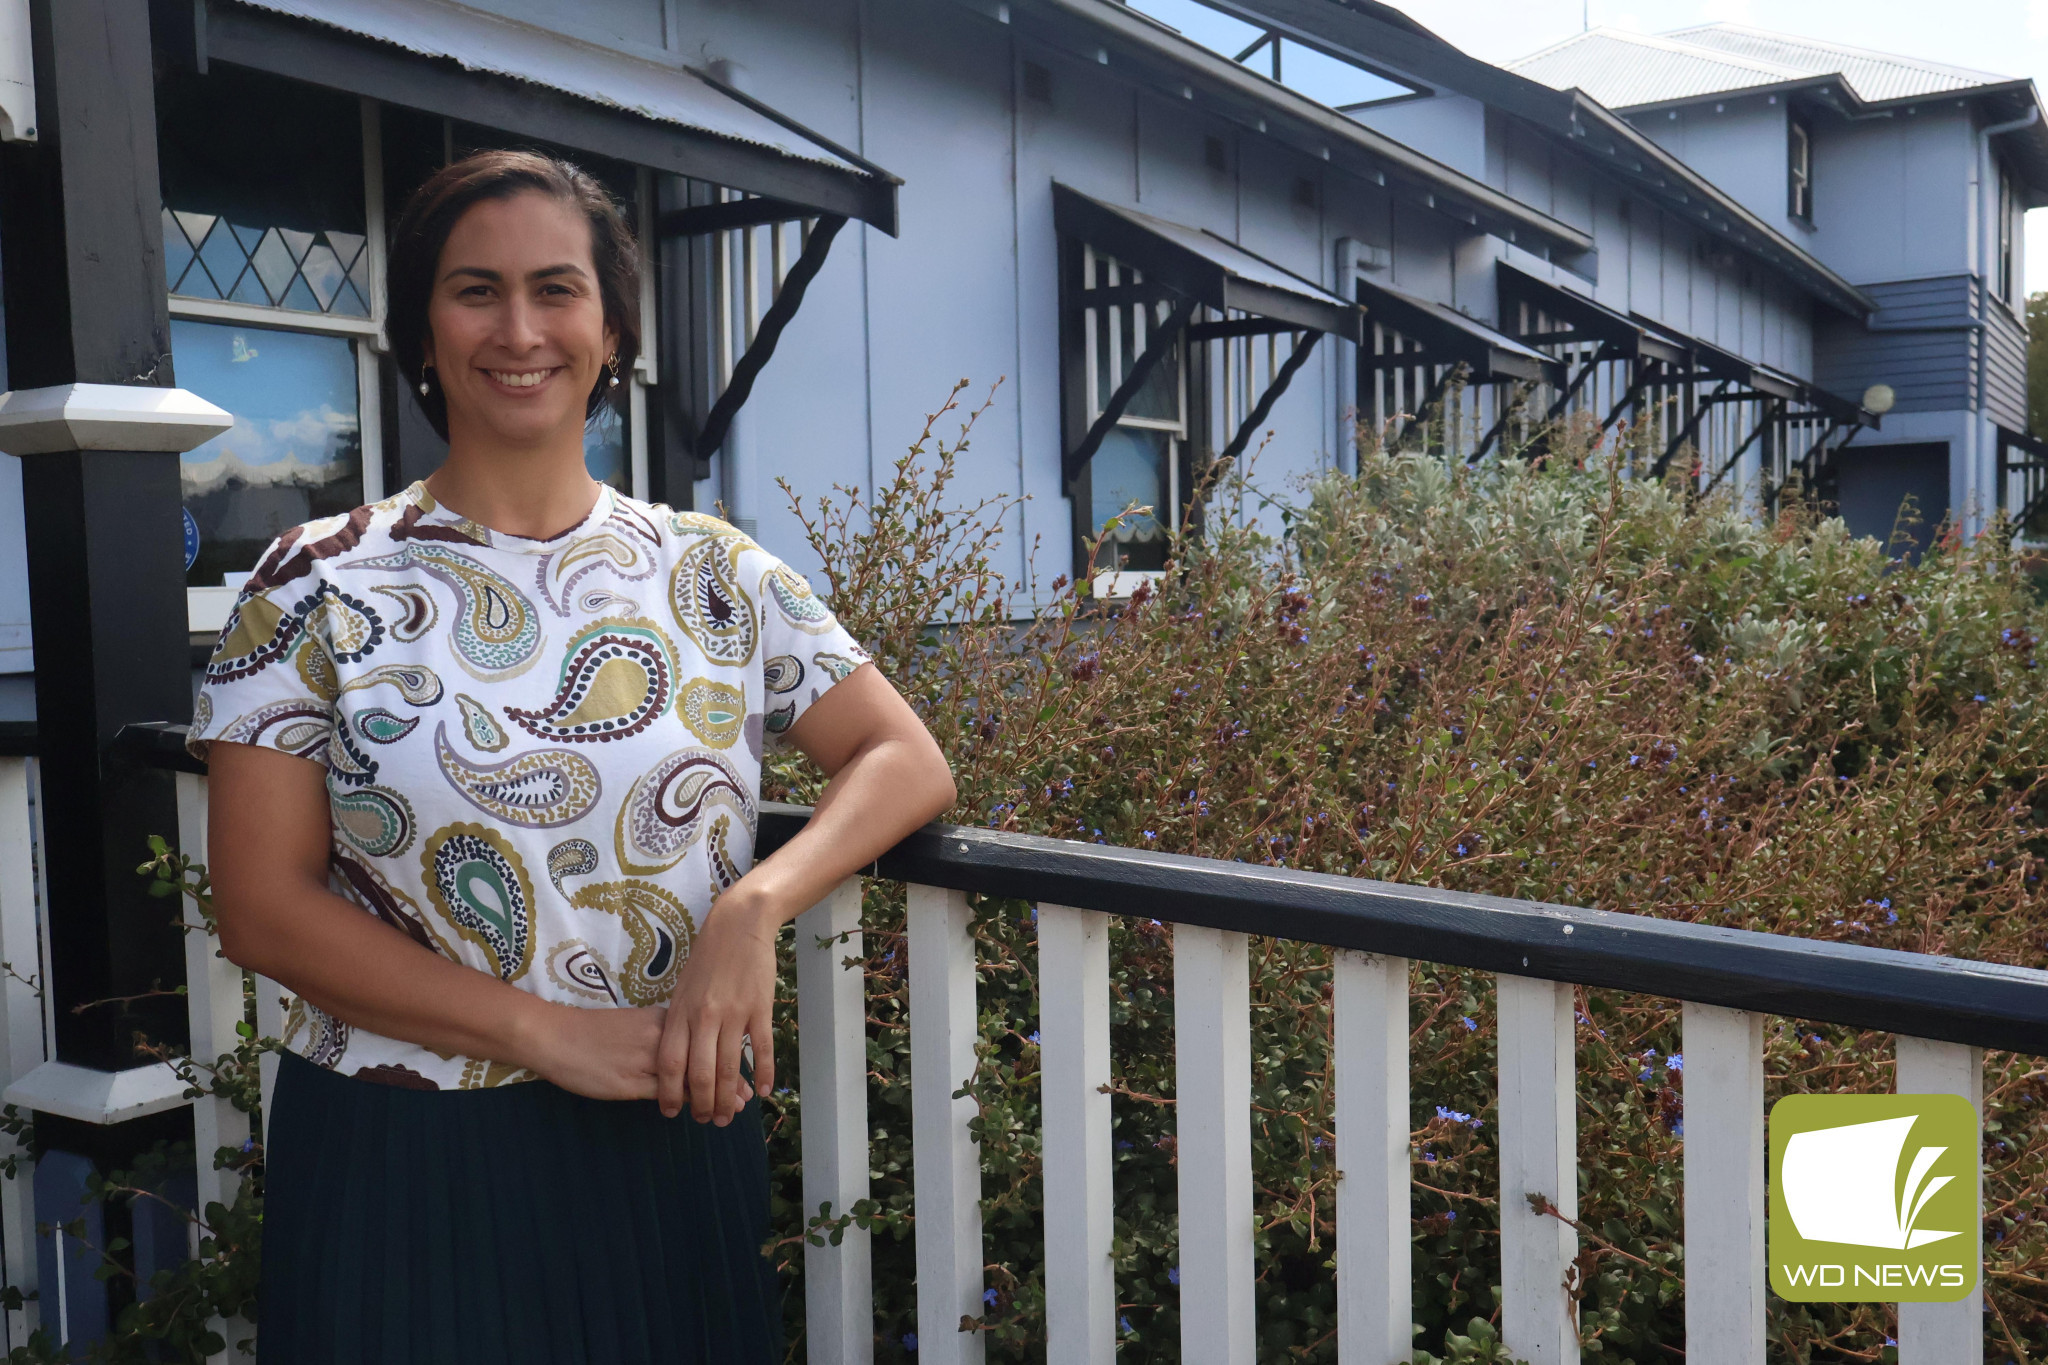 Fresh faces: Camperdown Clinic has recently welcomed two new registrars. Pictured is new addition Katherine Penaloza, who loves the community feel of Camperdown.